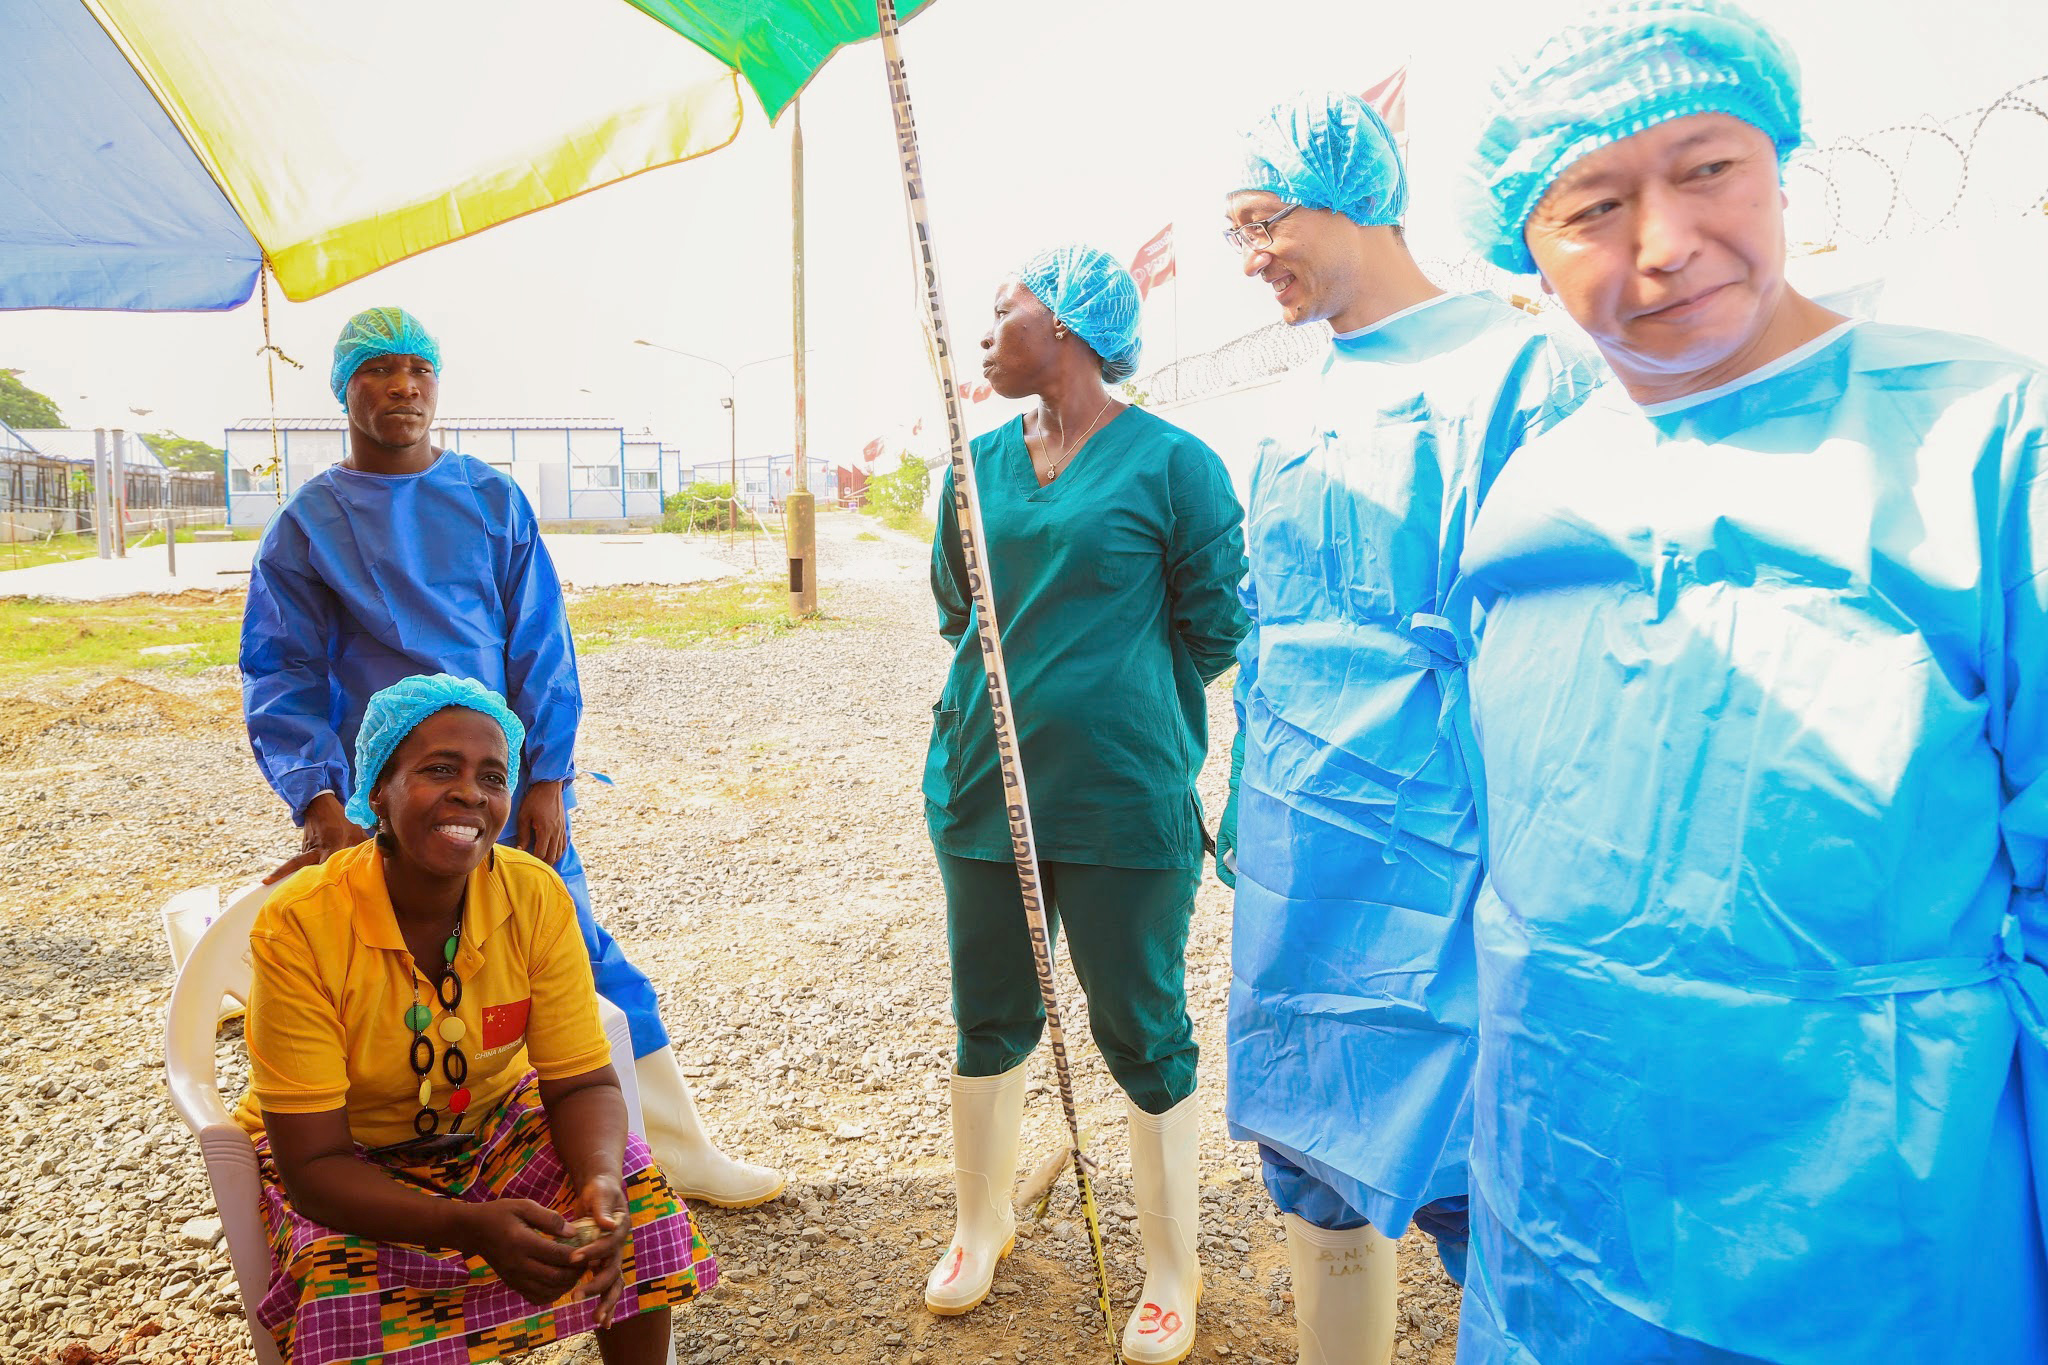 PHOTO: Beatrice Yardolo poses for a photo with staff members of the Chinese Ebola treatment unit on the day of her release in Monrovia, Liberia on March 5, 2015.